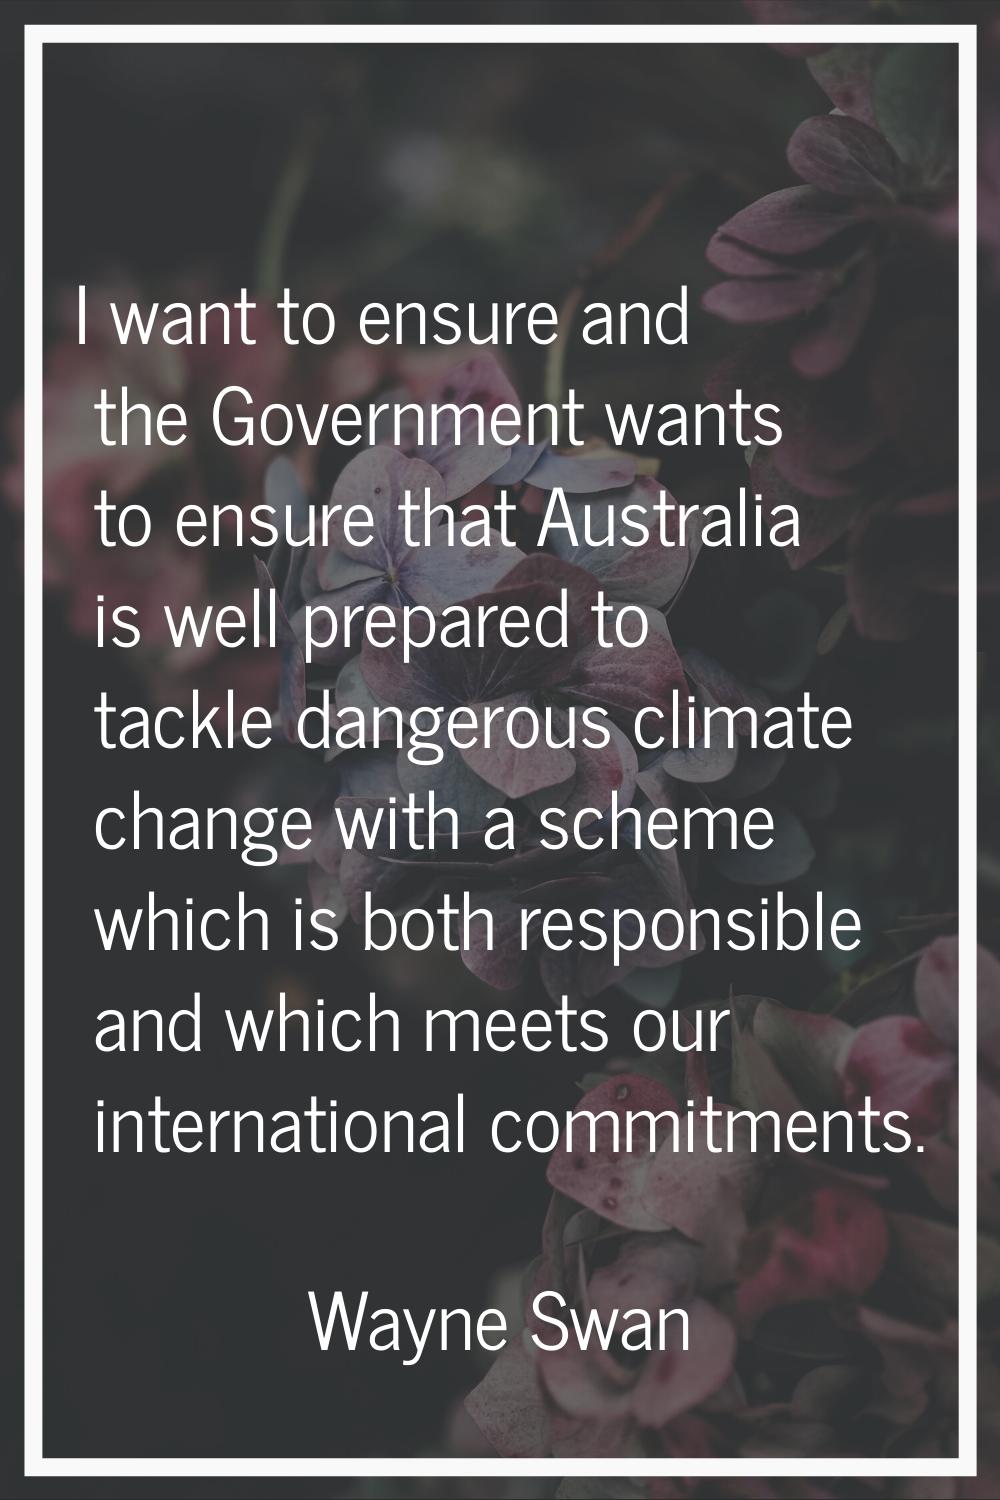 I want to ensure and the Government wants to ensure that Australia is well prepared to tackle dange